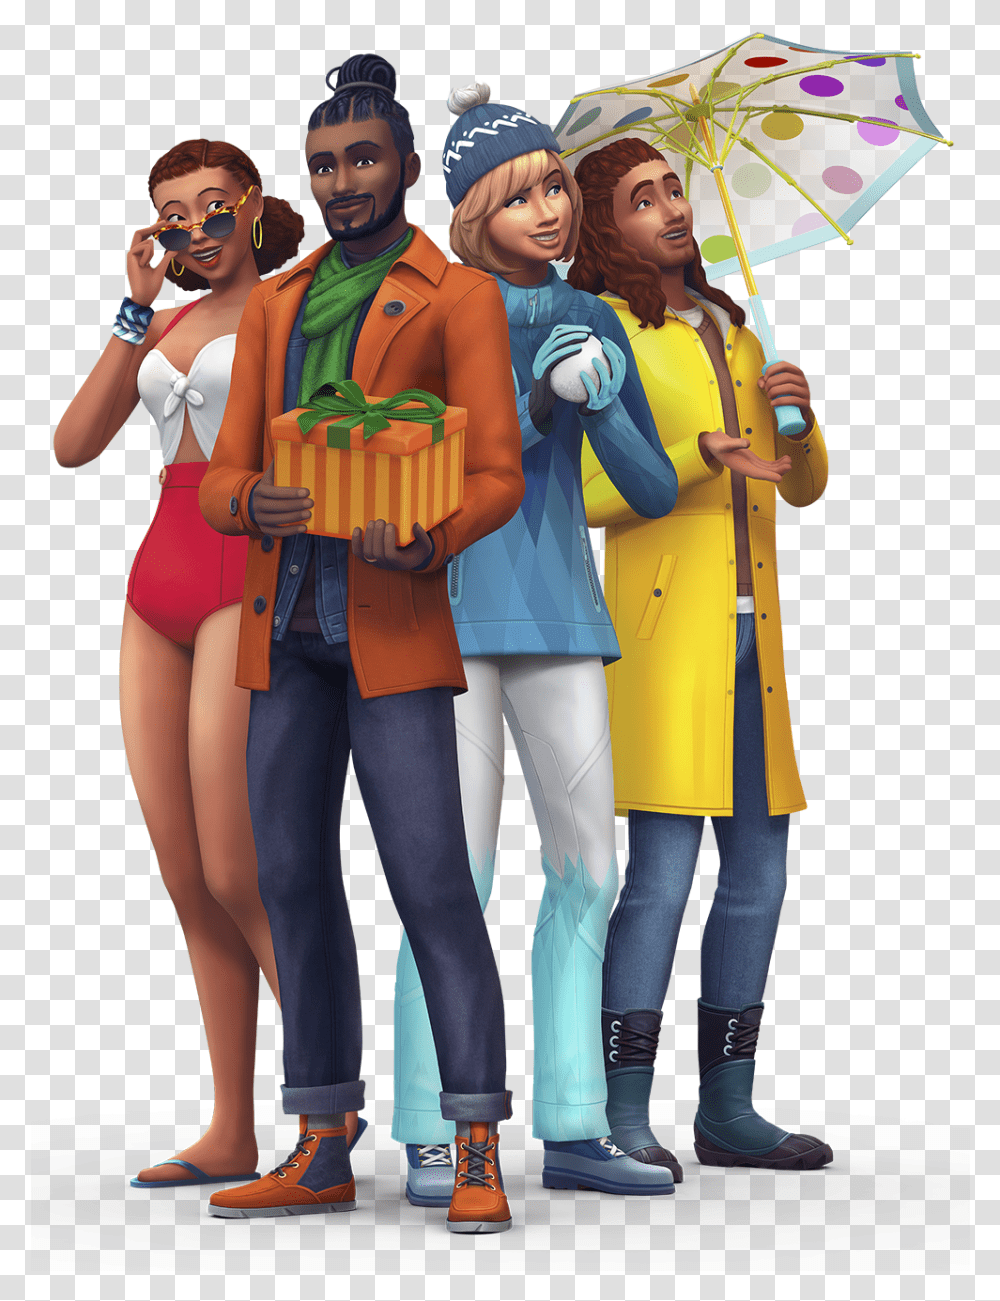 The Sims Sims 4 Seasons Sims, Costume, Person, Sunglasses Transparent Png